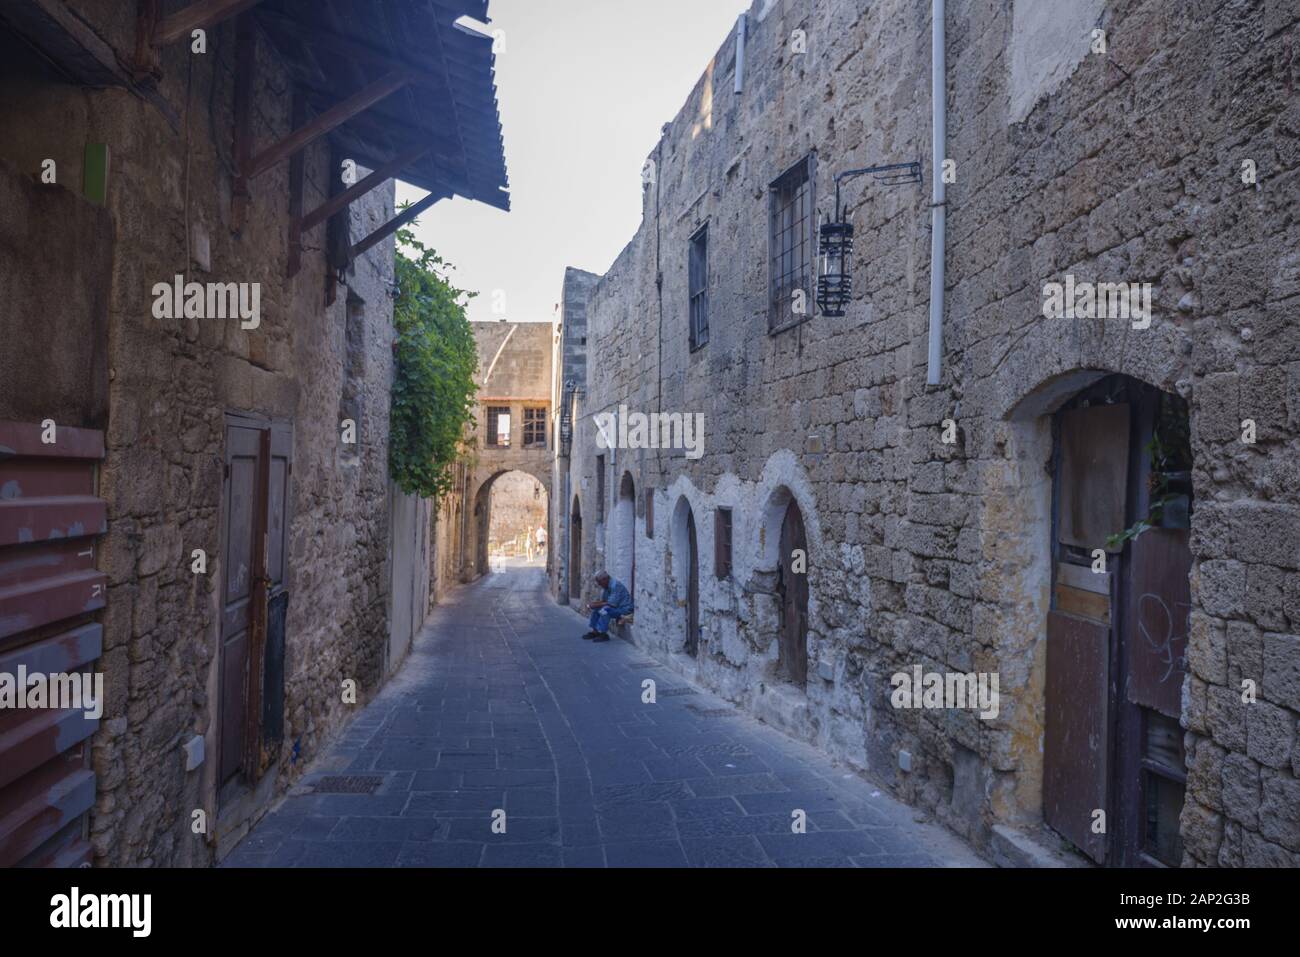 Narrow street in the medieval city inside of Fortifications of Rhodes. Stock Photo